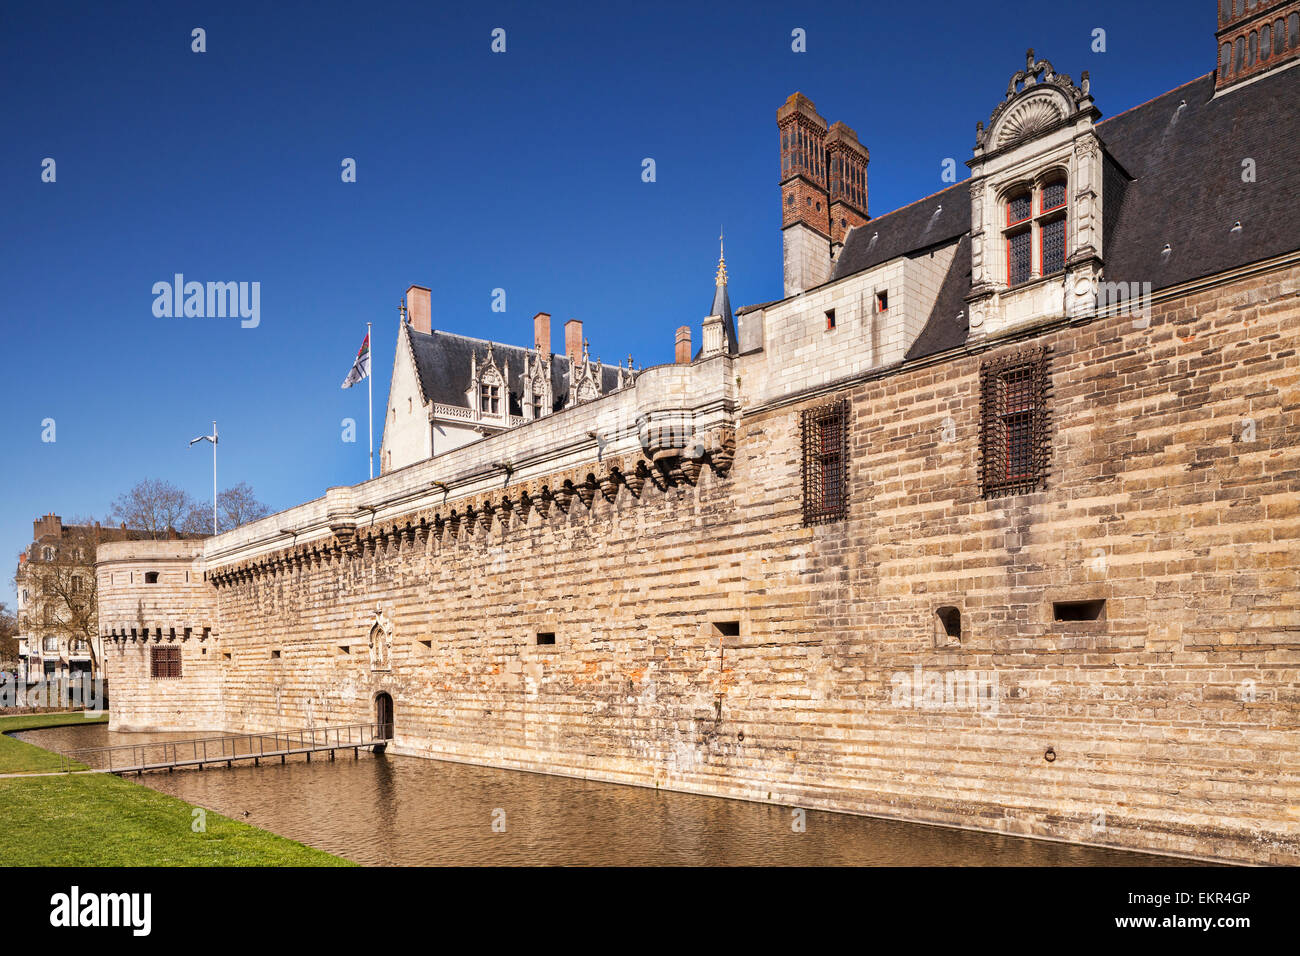 Ramparts and moat of the Chateau of the Dukes of Brittany, Nantes, Loire Atlantique, France. Stock Photo